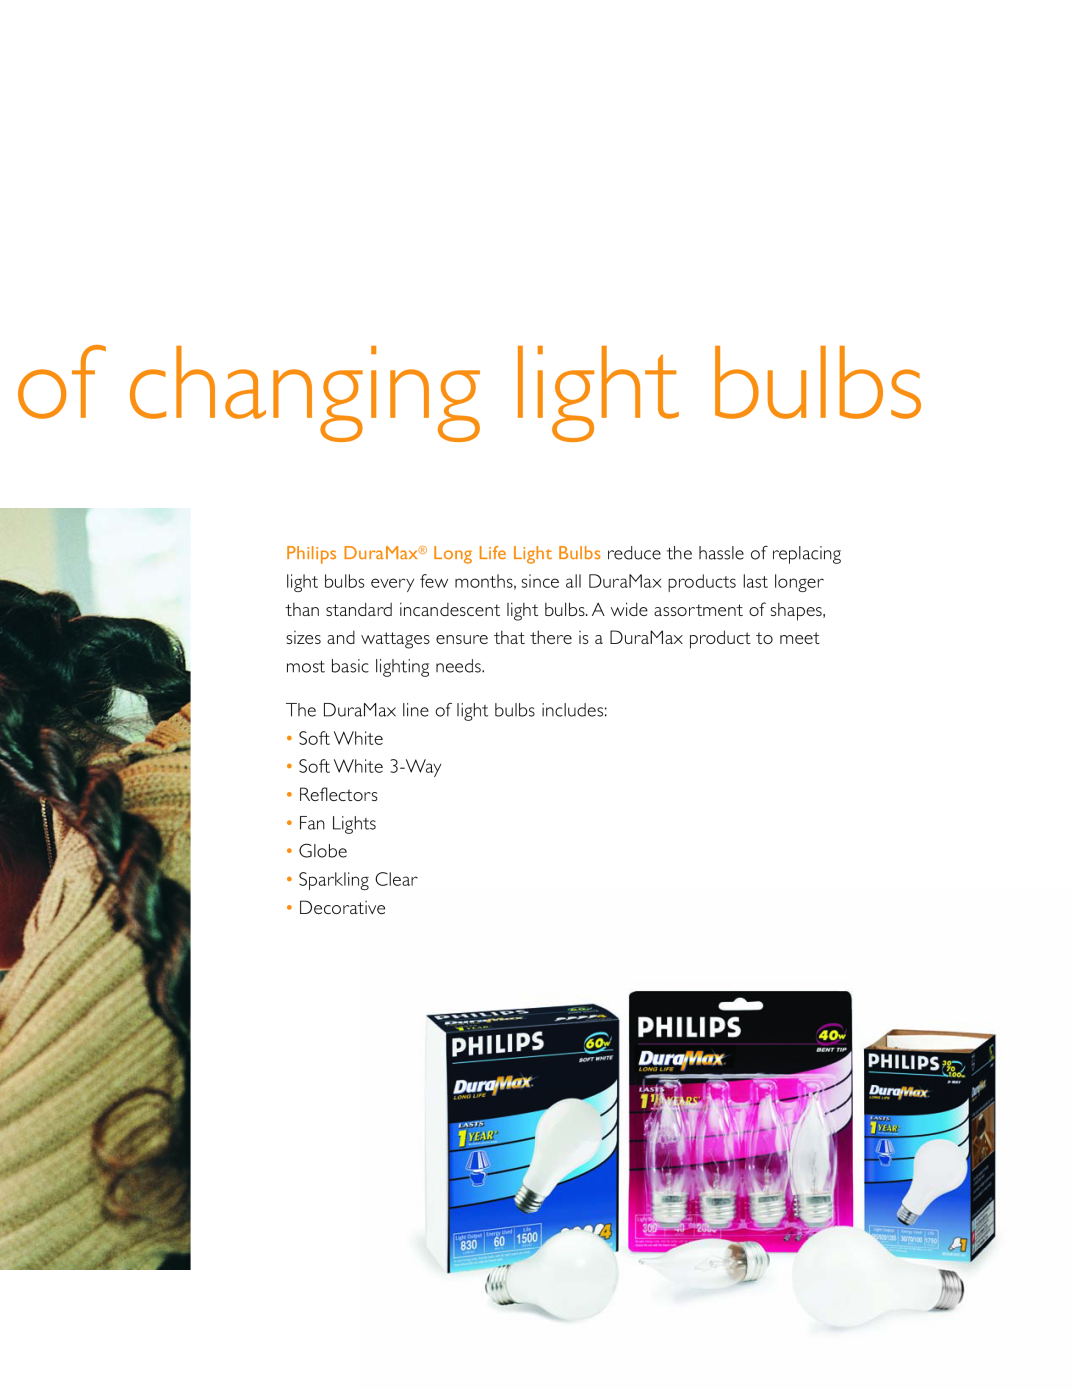 Philips Long Life Light Bulb manual The DuraMax line of light bulbs includes, Soft White Soft White 3-Way Reflectors 